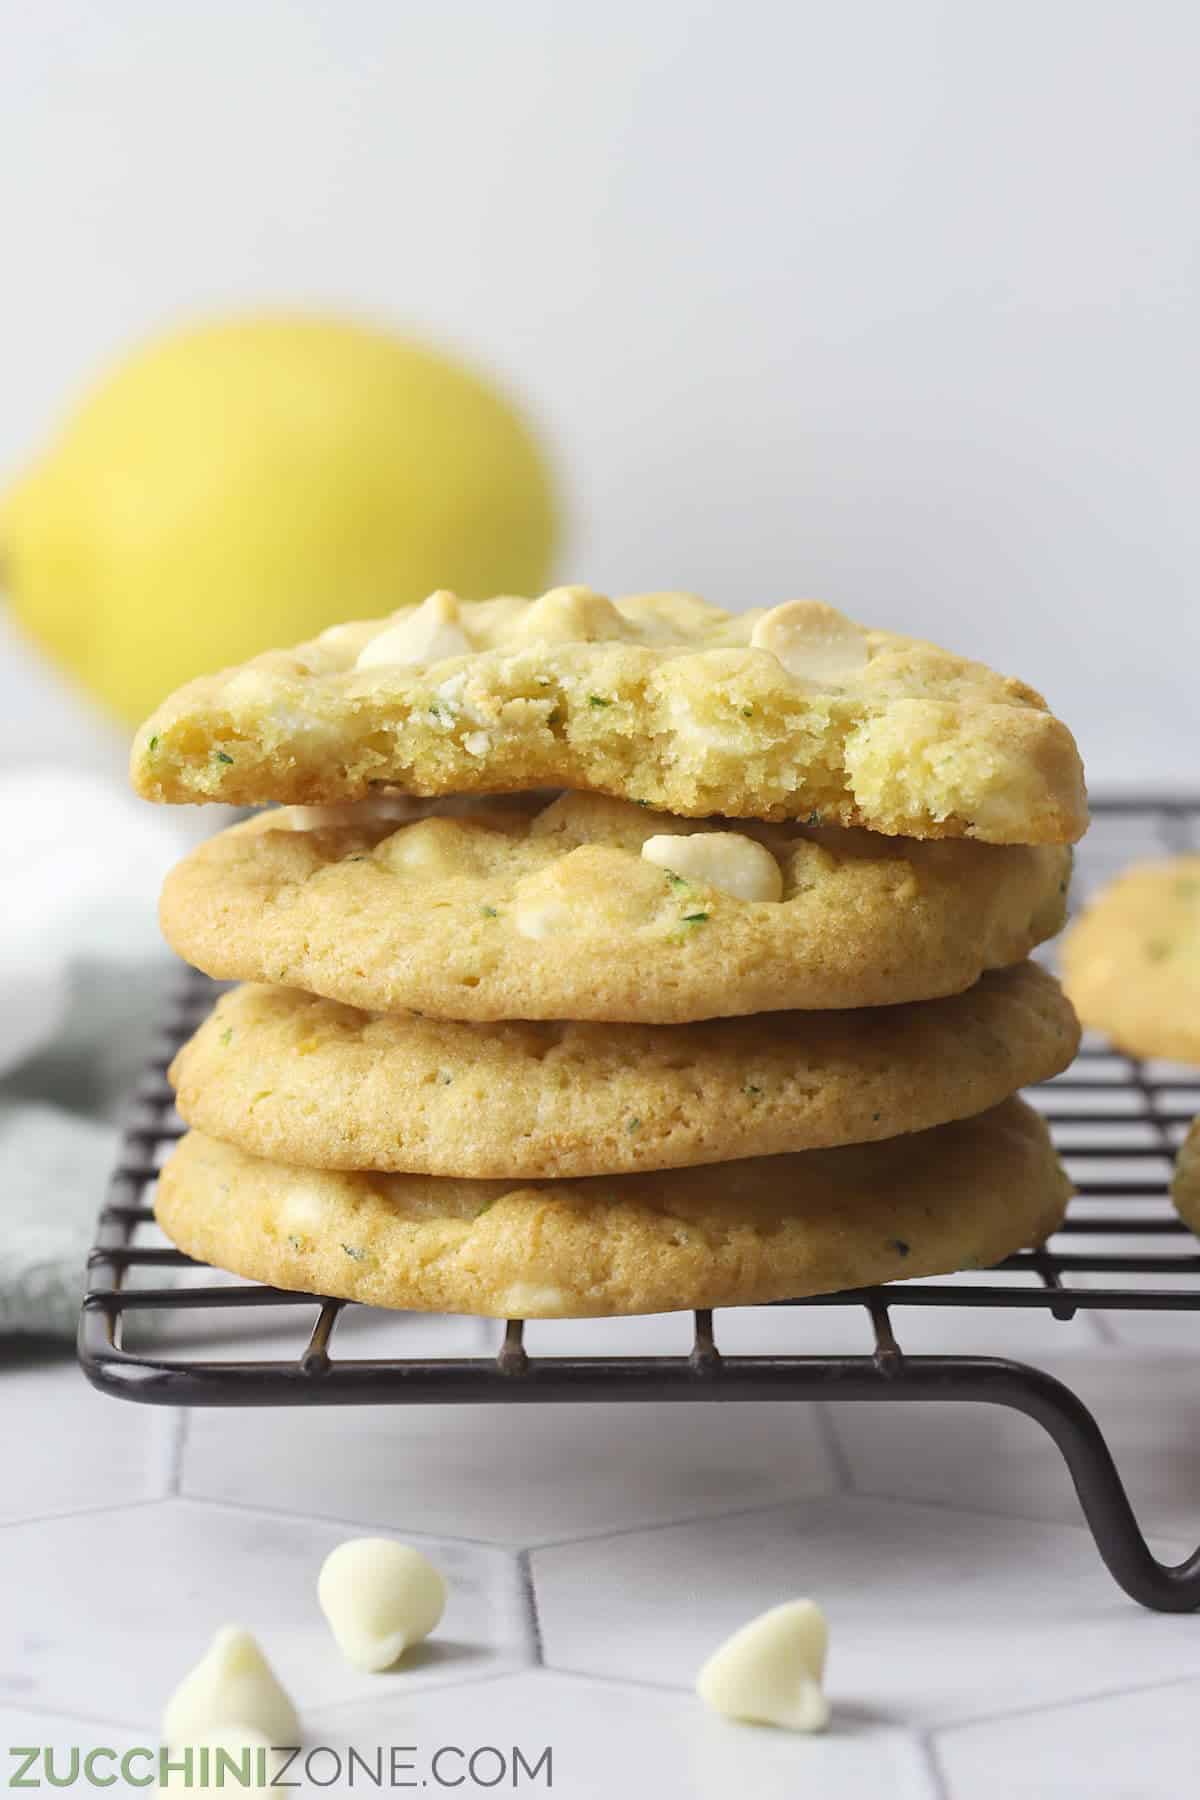 A stack of lemon cookies, made from a unique cookie recipe, on a cooling rack.